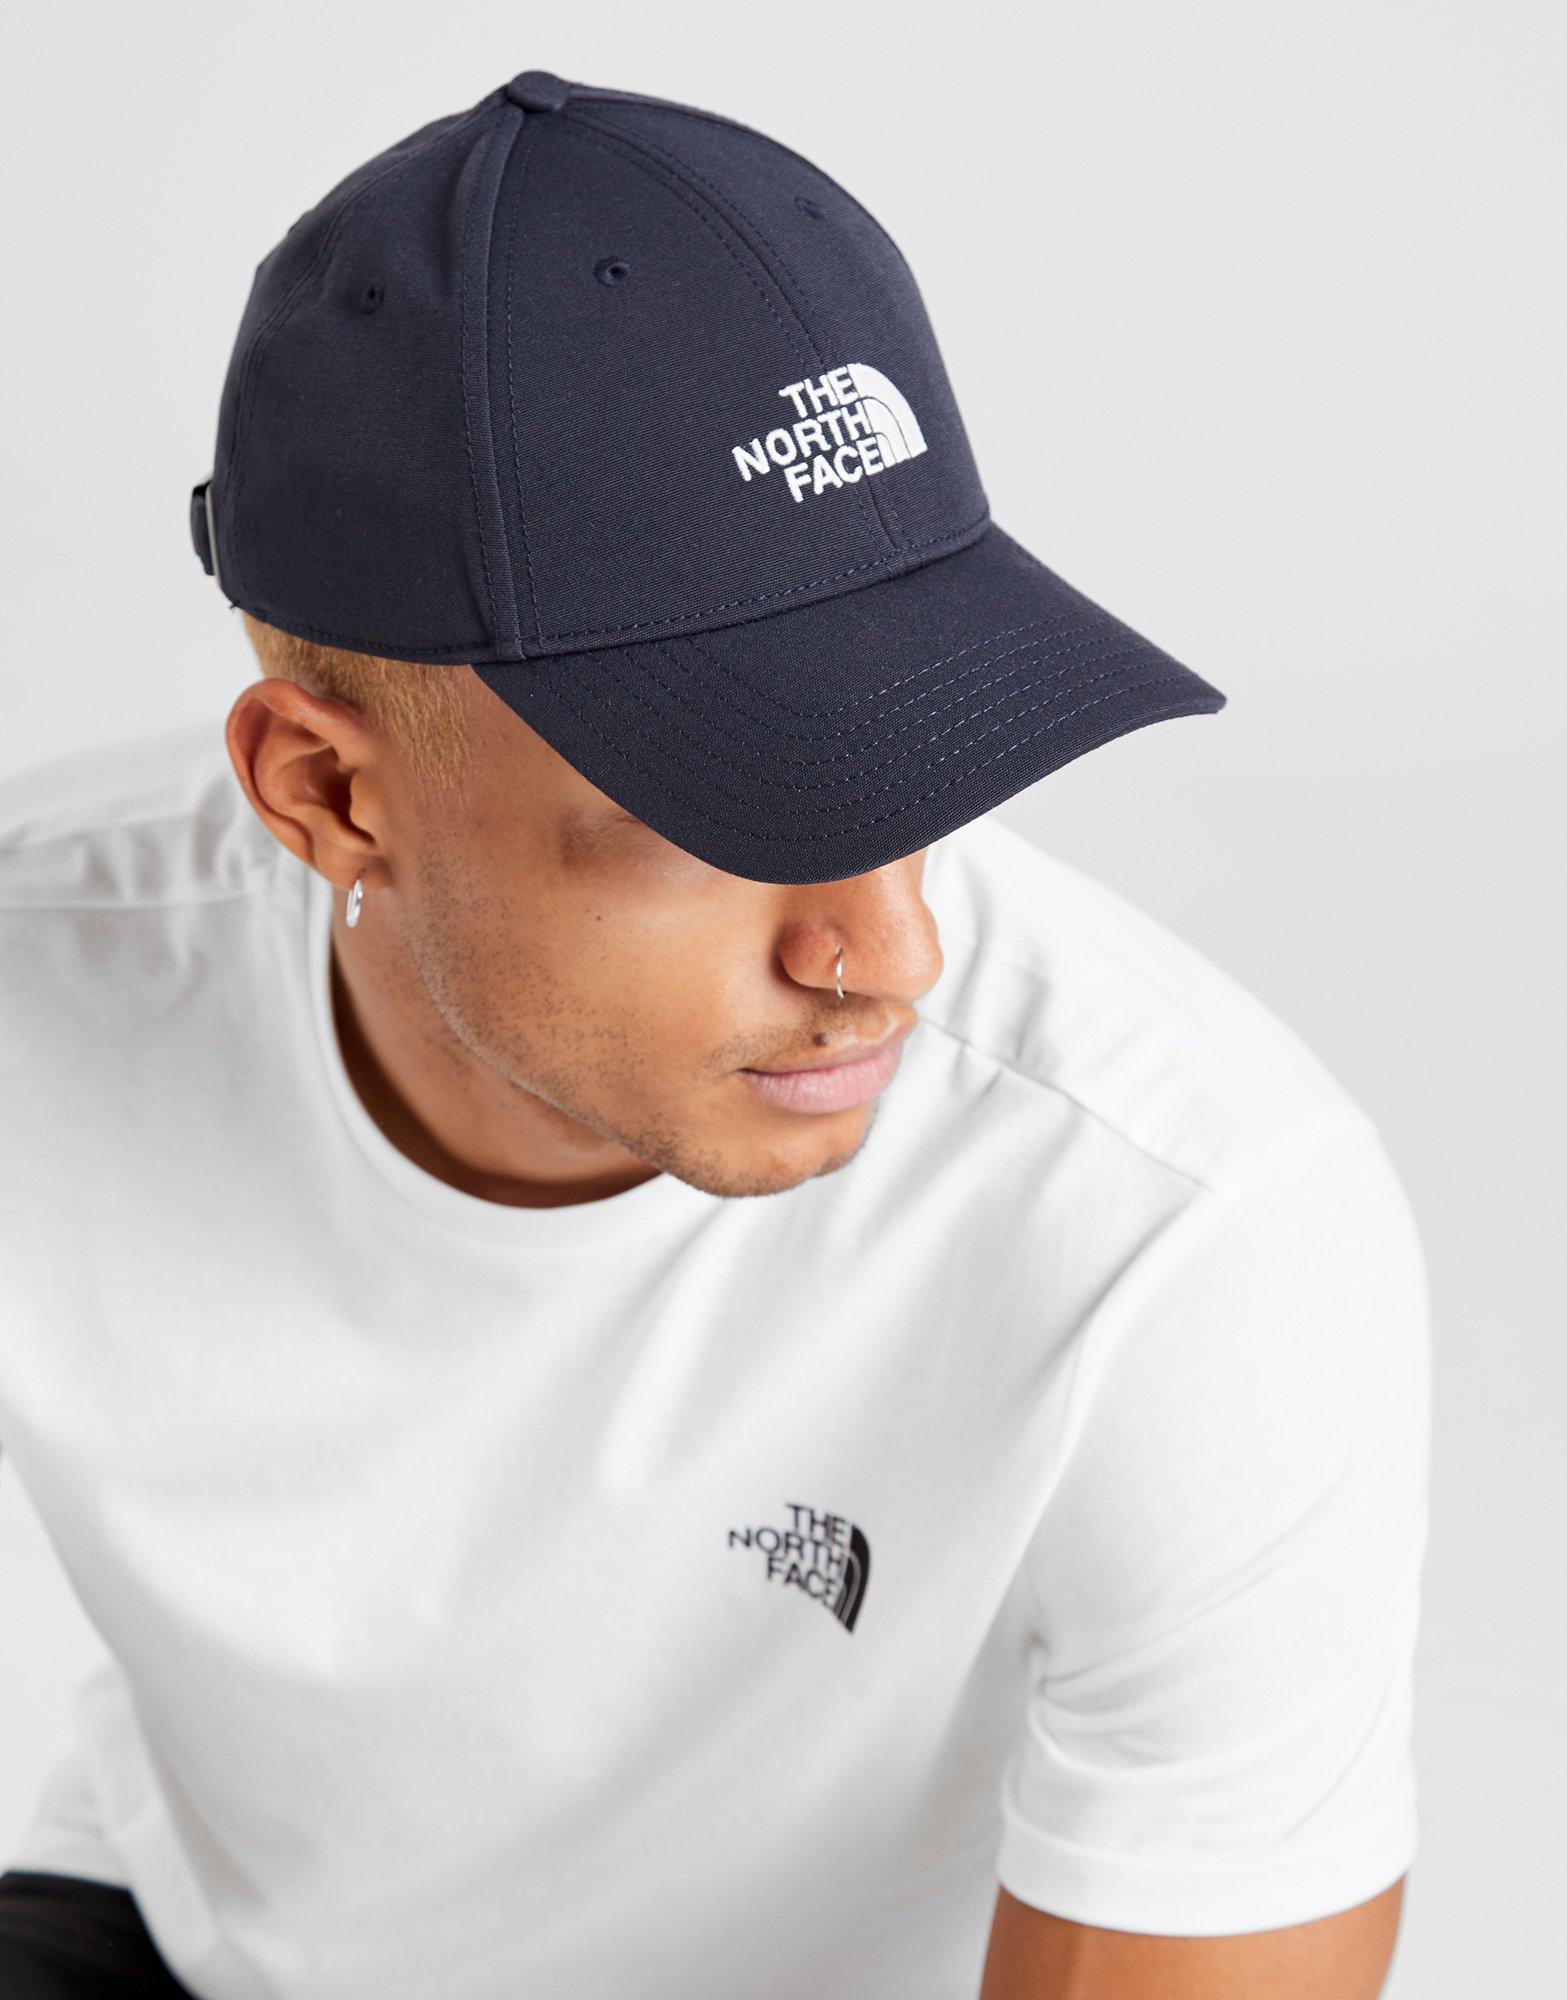 north face classic hat 